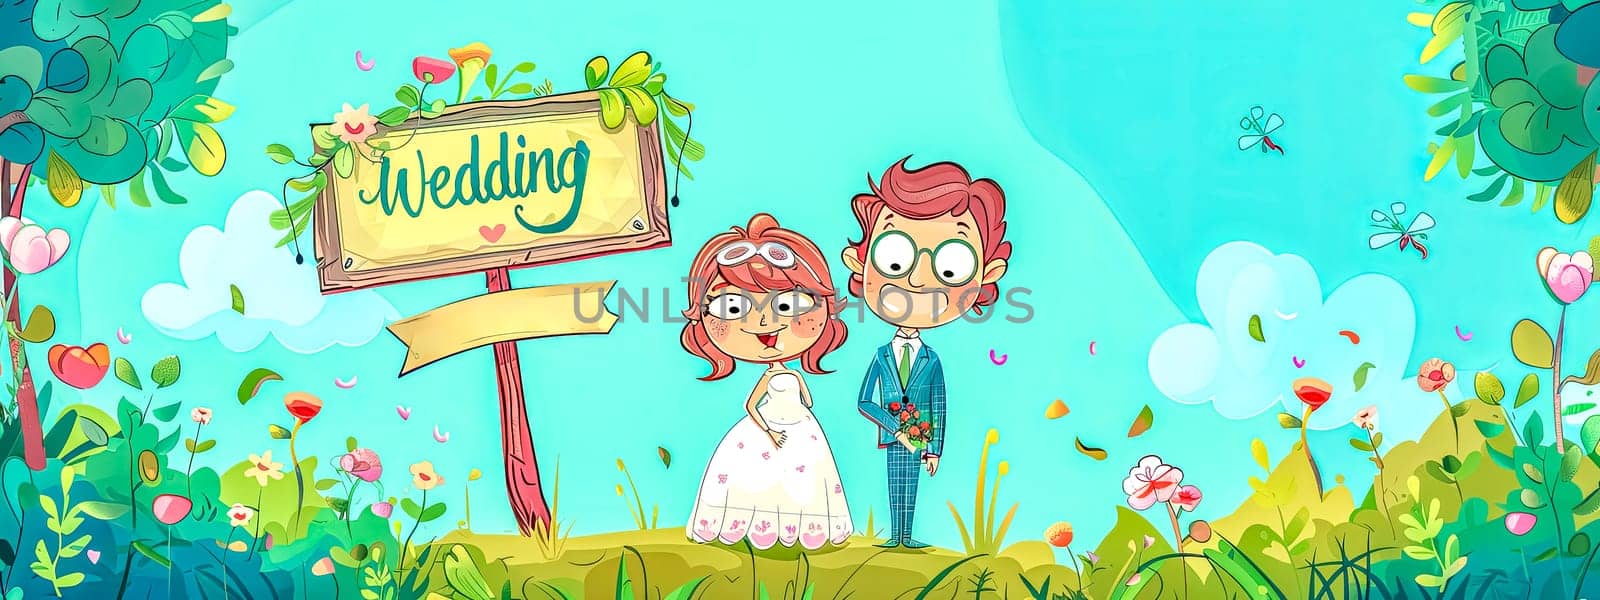 Colorful cartoon of a cute couple on their wedding day, standing in a vibrant, floral scene with a sign by Edophoto